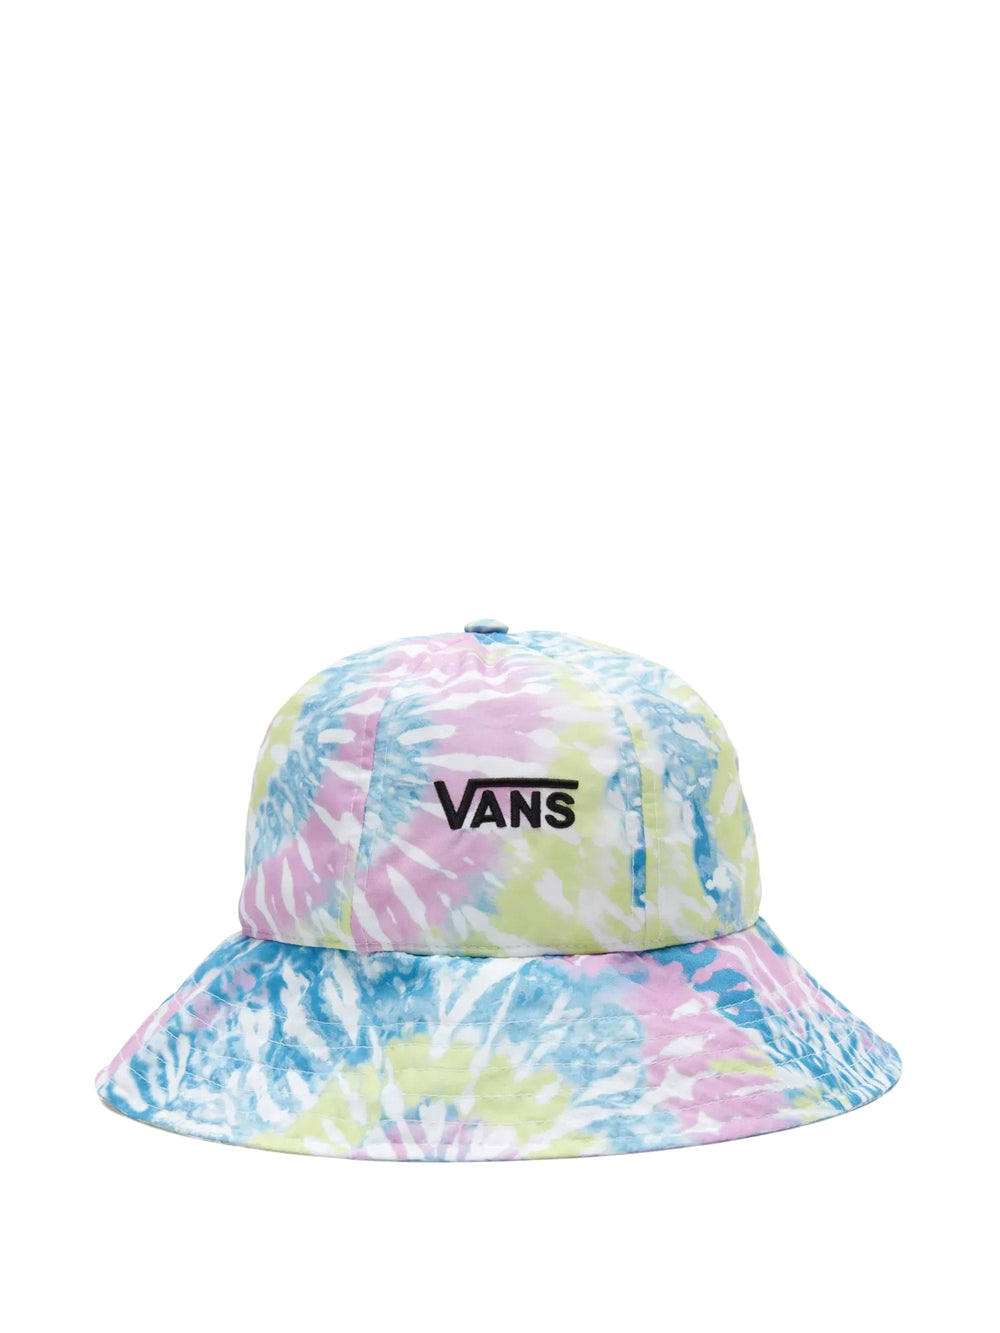 VANS FAR OUT BUCKET HAT  - CLEARANCE